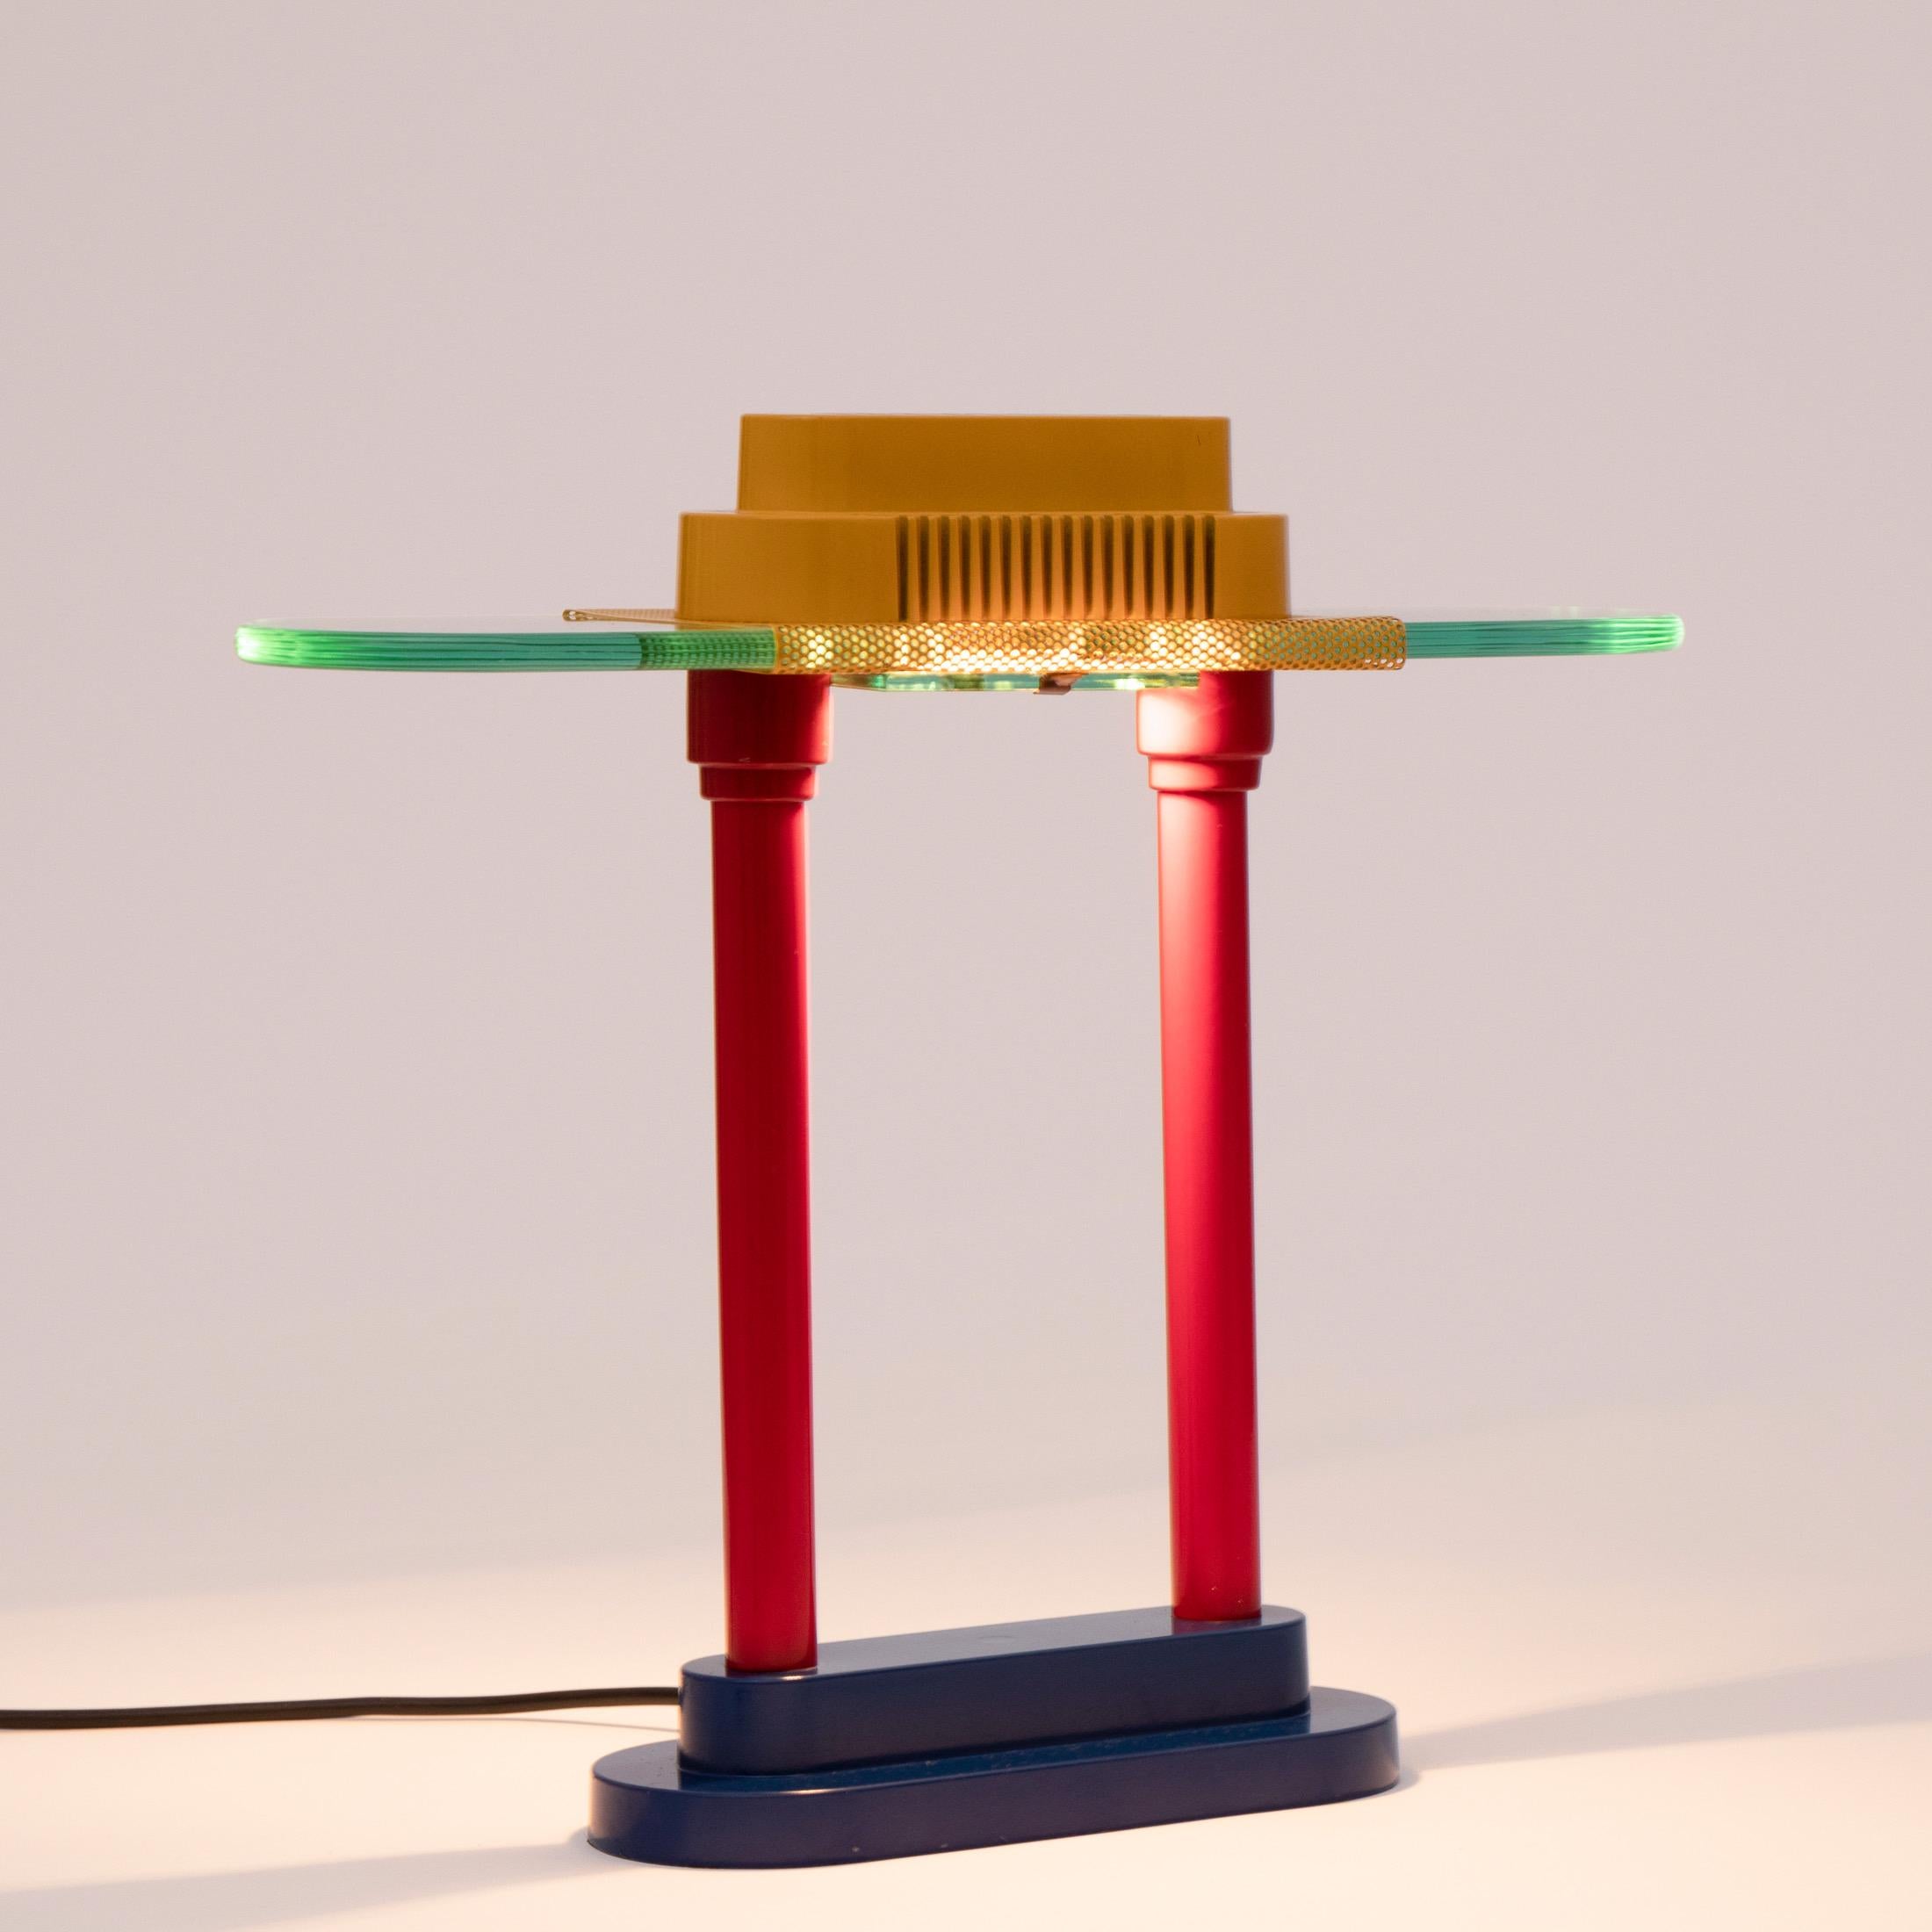 Desk lamp by Robert Sonneman for George Kovacs.
This one in a rare color version of yellow and red
Measures: H 38 cm, W 45 cm, D 12 cm
American, circa 1987.